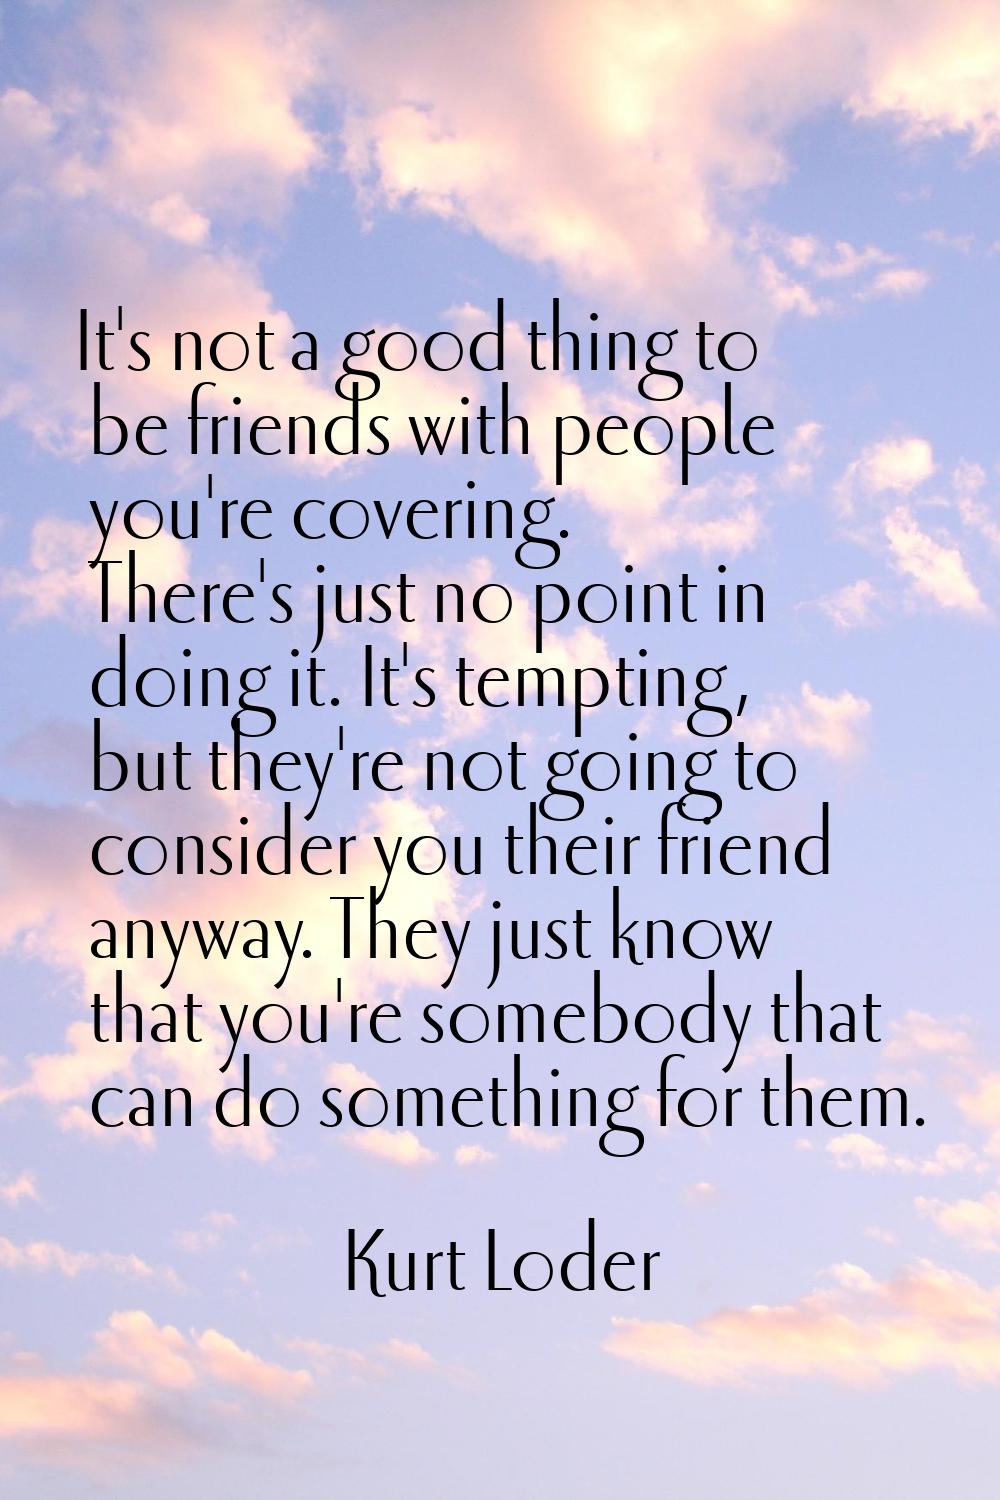 It's not a good thing to be friends with people you're covering. There's just no point in doing it.